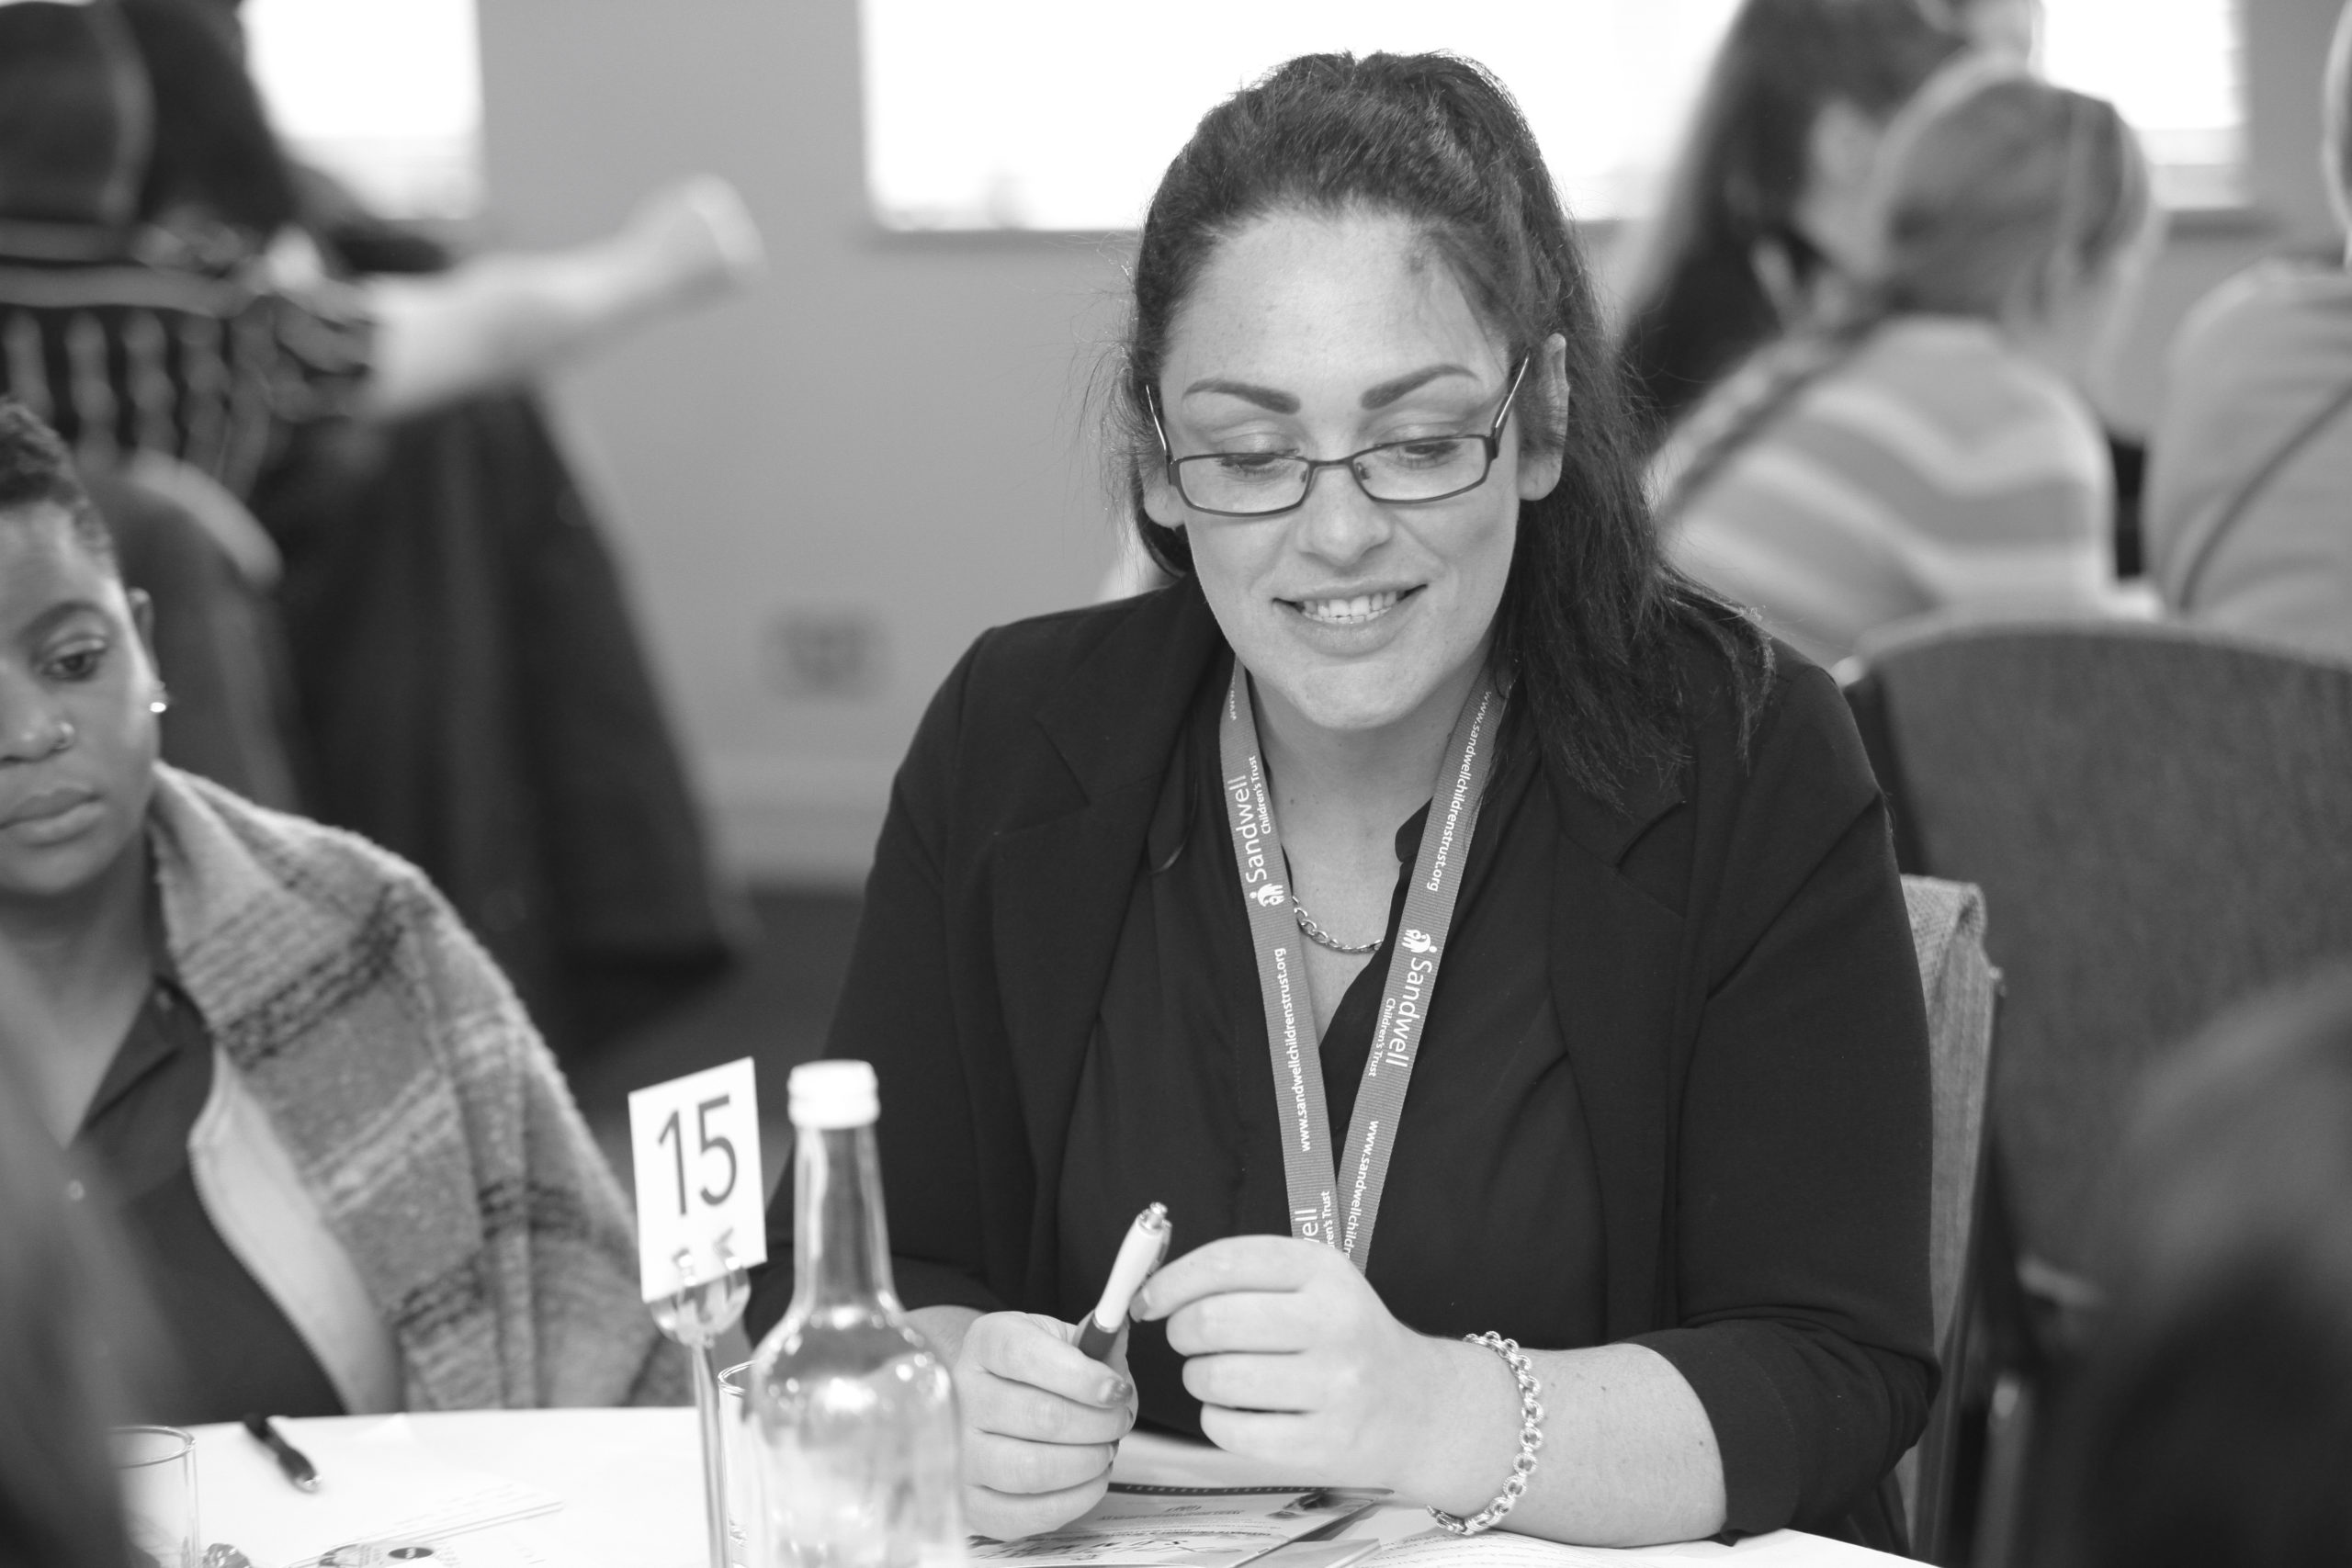 A woman smiling at a staff training event